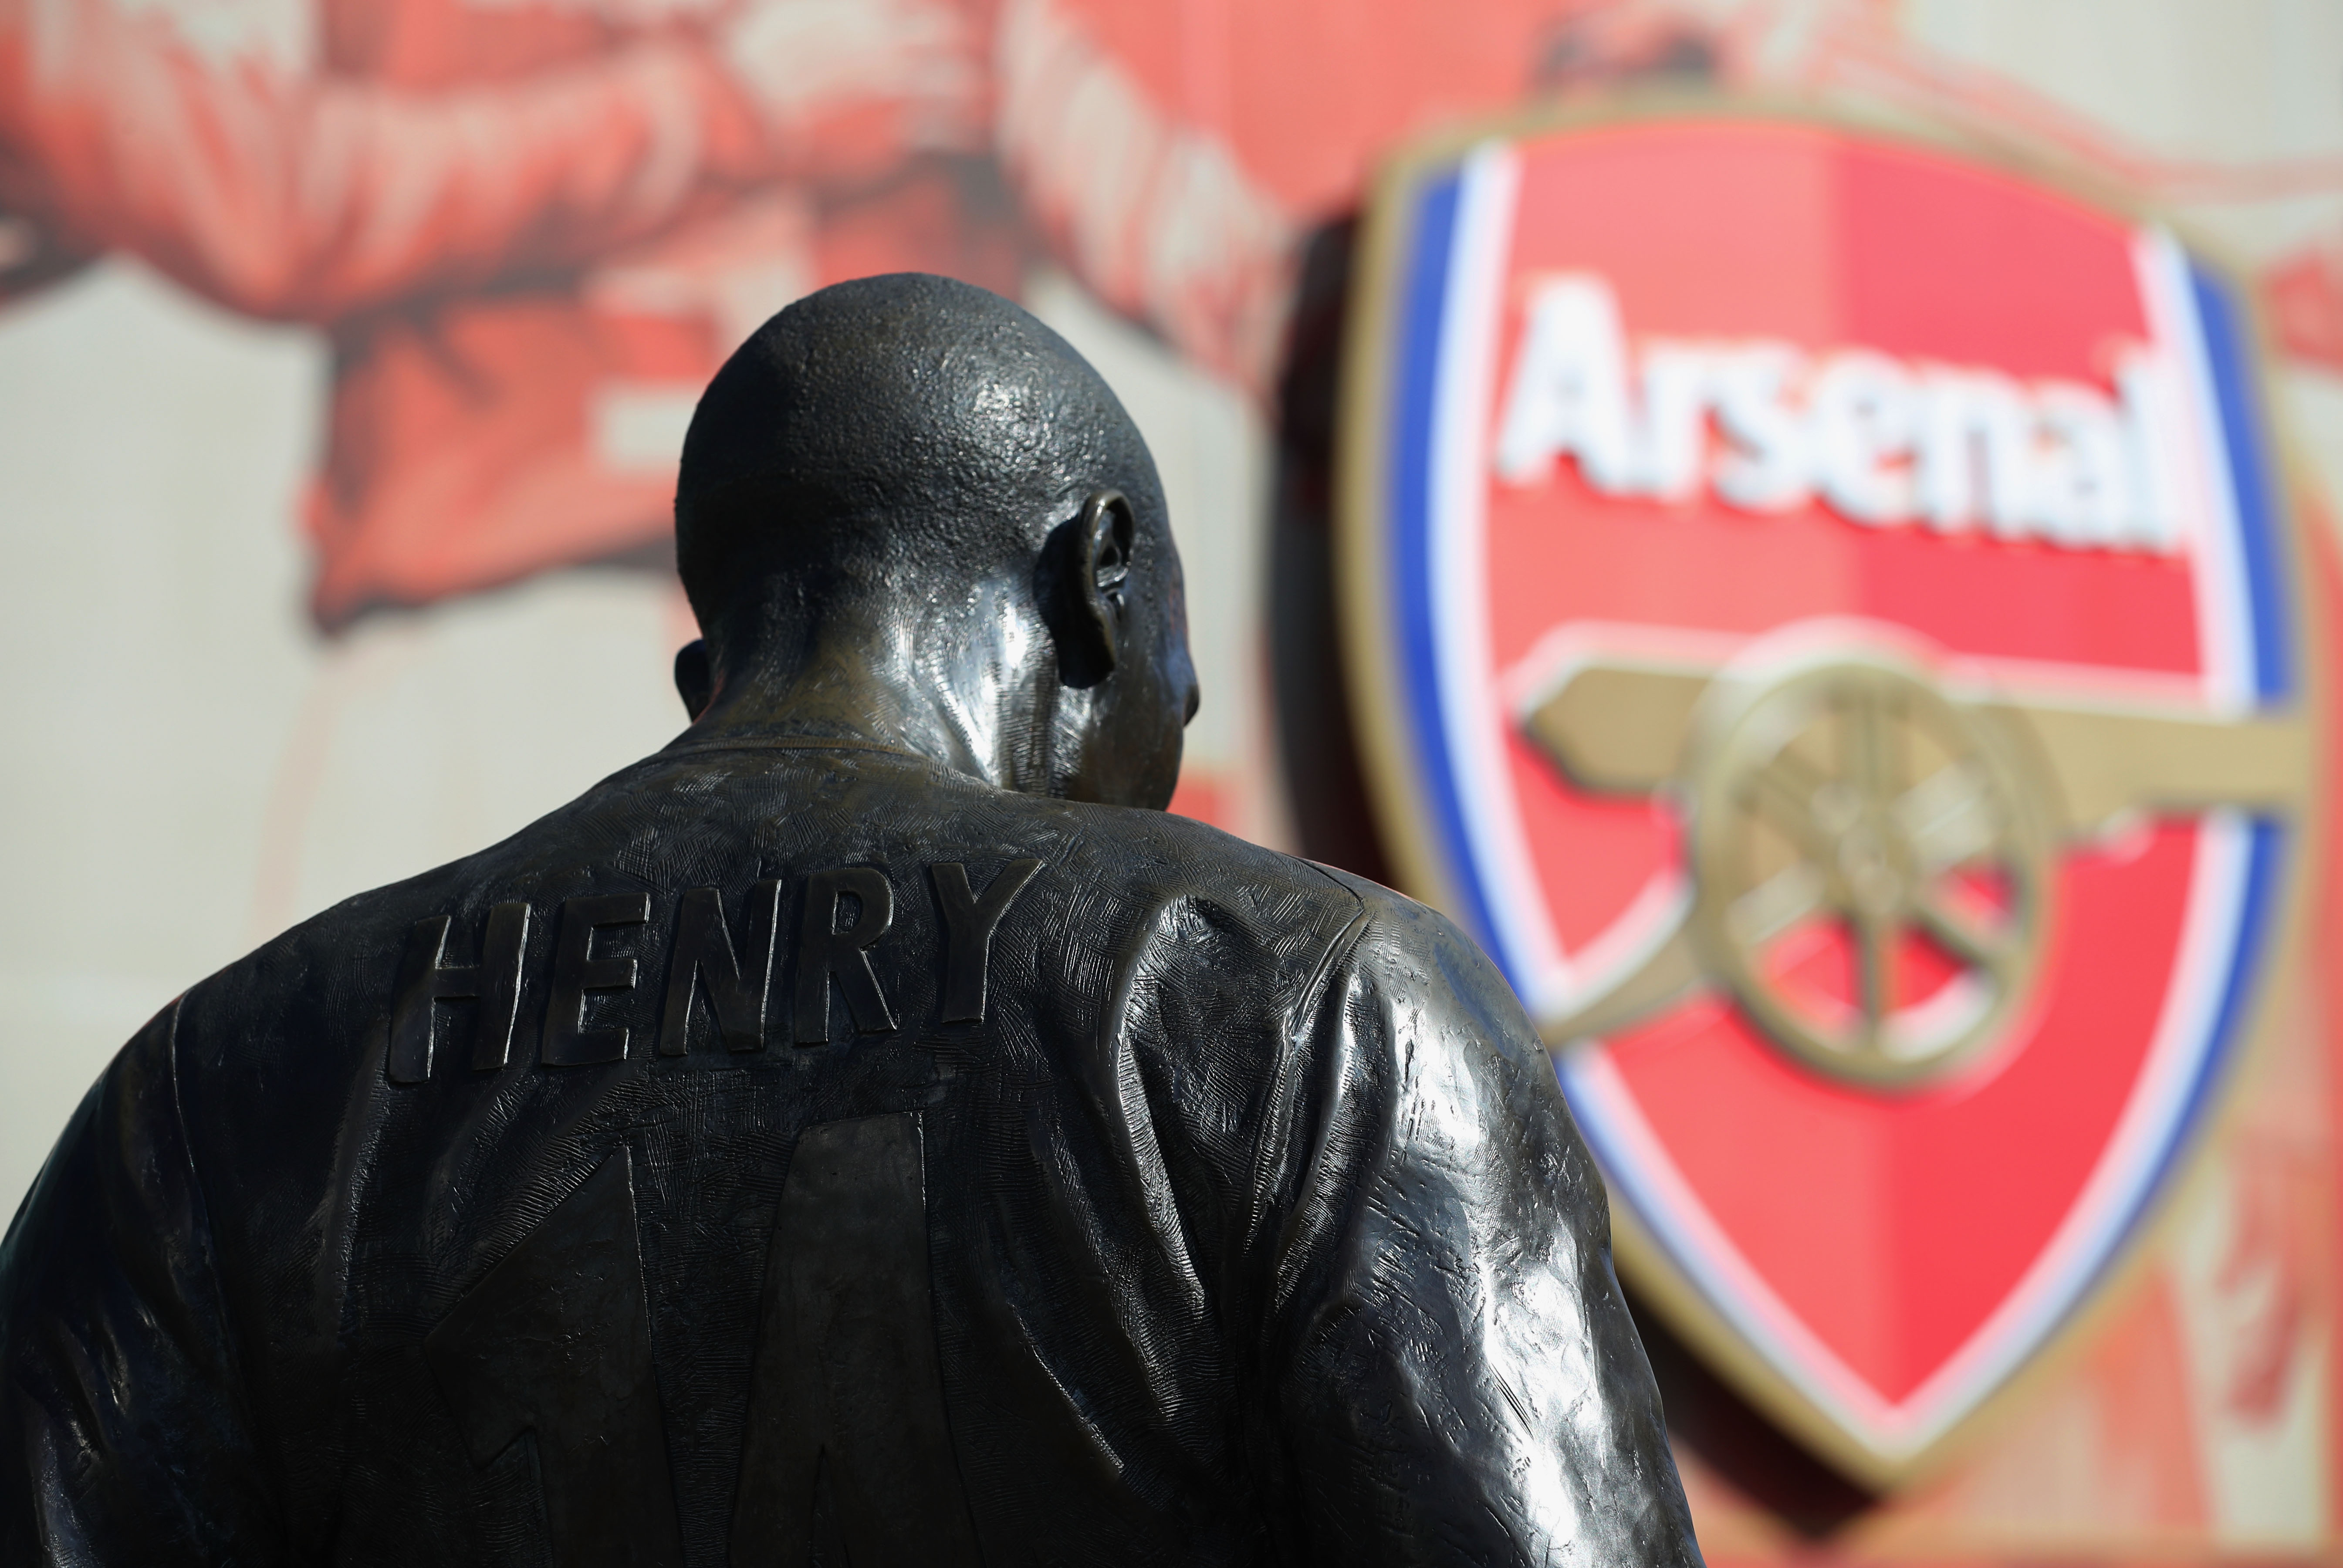 LONDON, ENGLAND - MARCH 13:  The Thierry Henry statue is seen prior to the Emirates FA Cup sixth round match between Arsenal and Watford at Emirates Stadium on March 13, 2016 in London, England.  (Photo by Richard Heathcote/Getty Images)